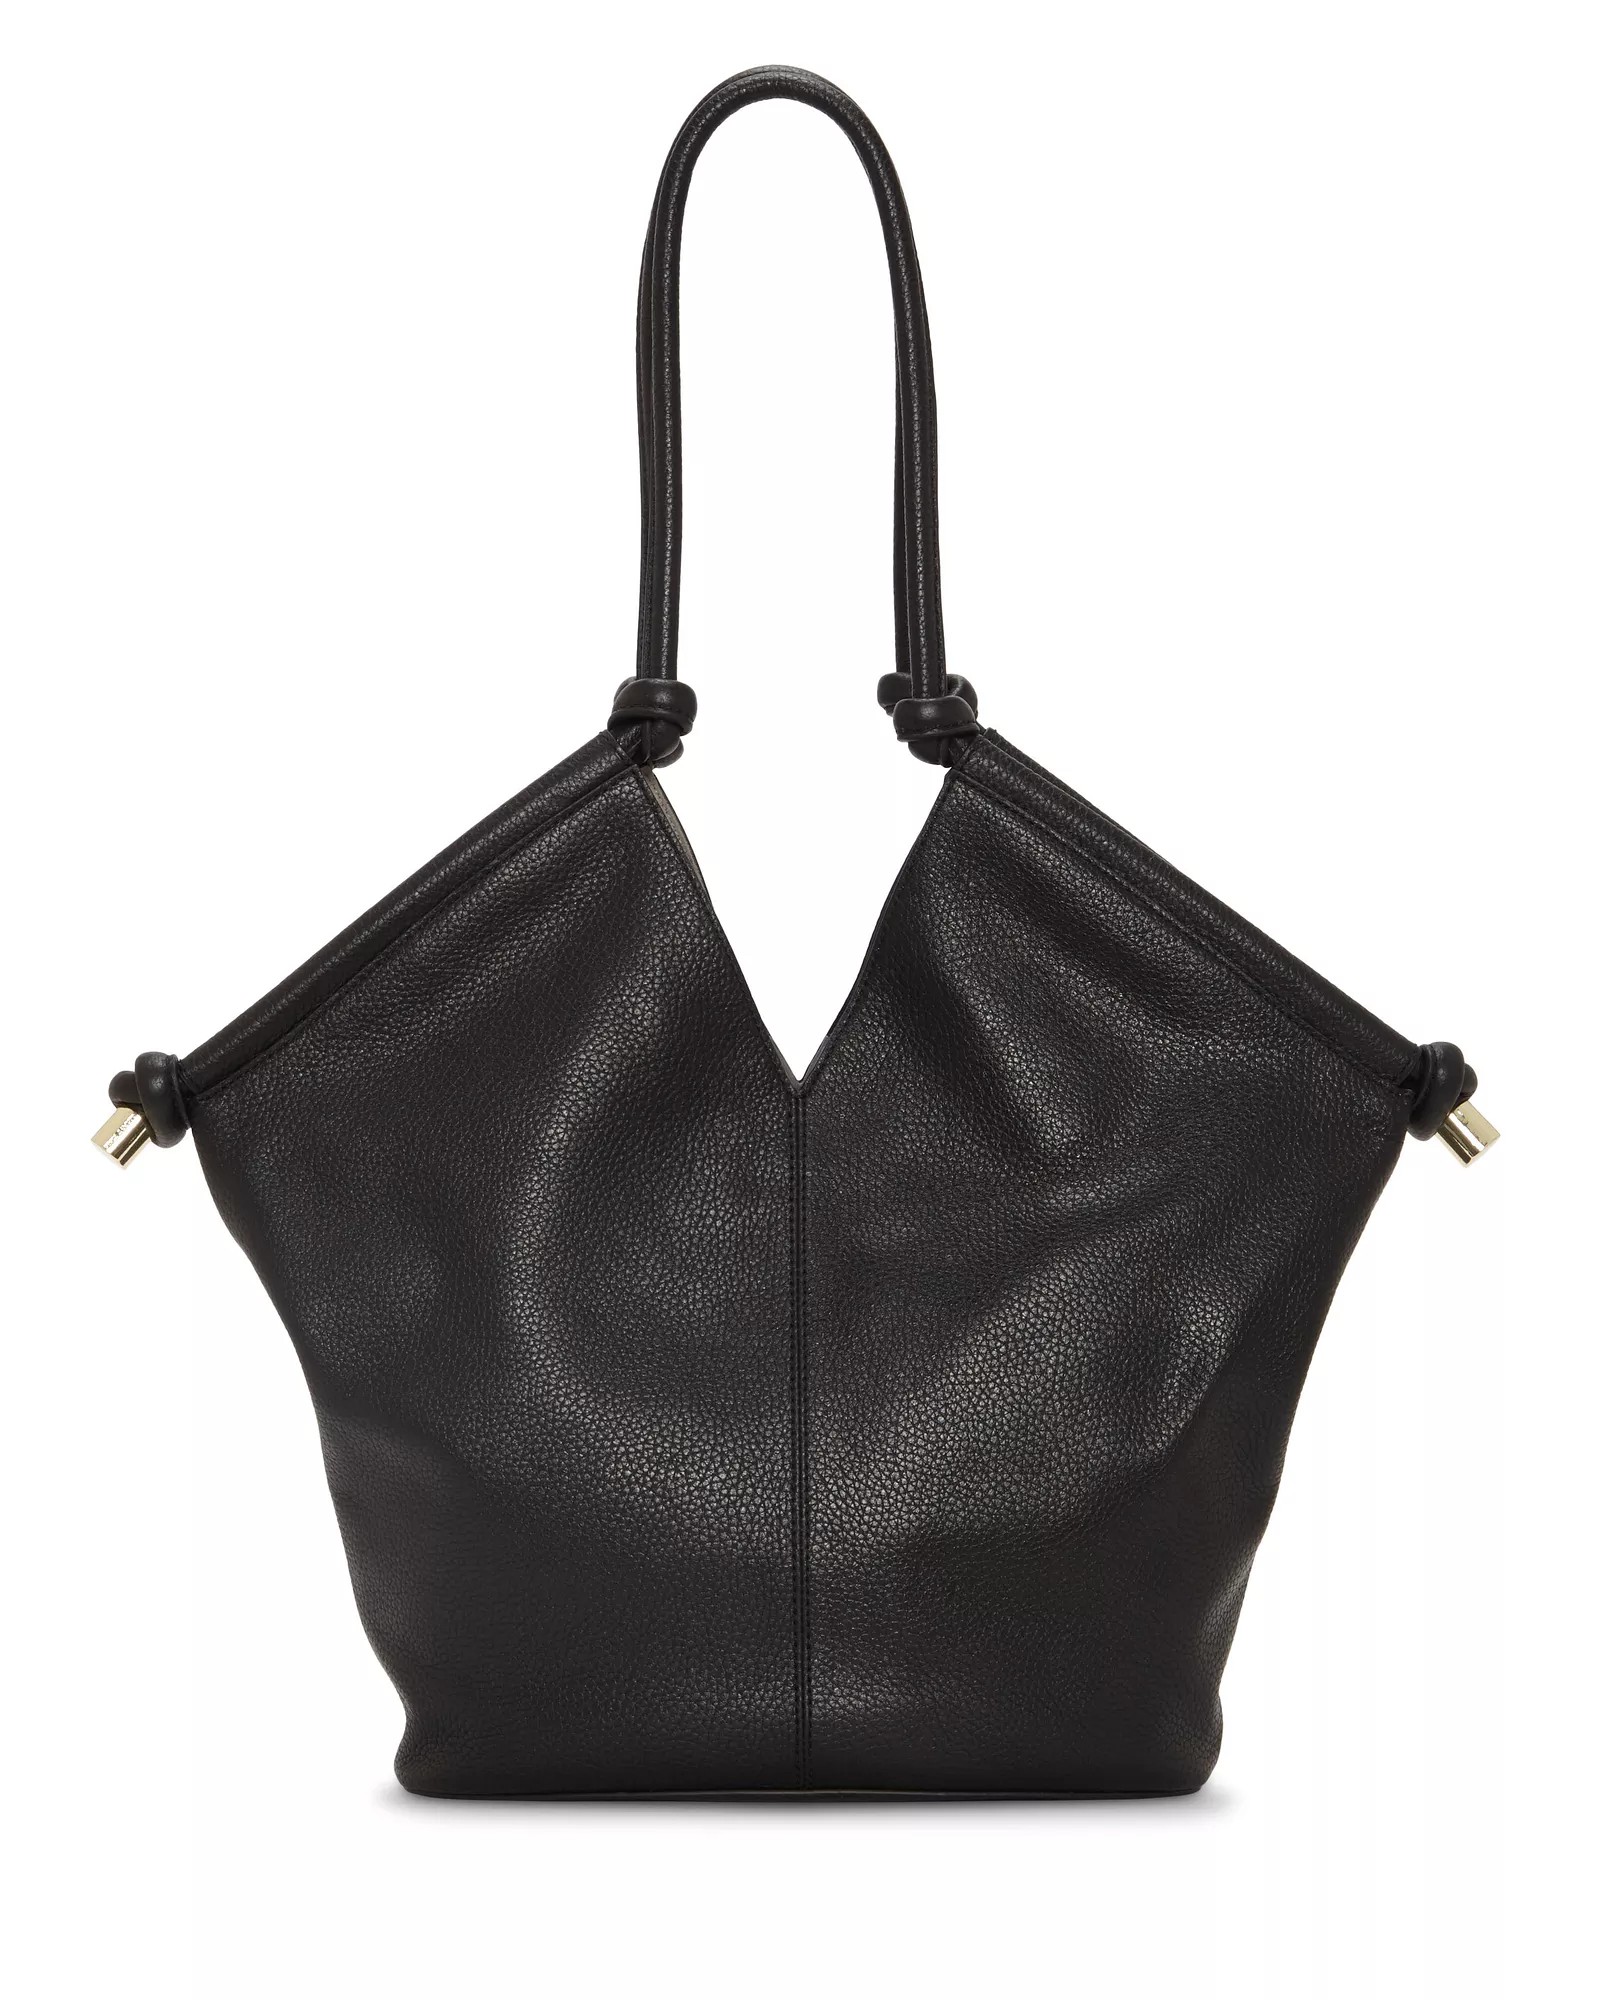 Vince Camuto Arjay Tote